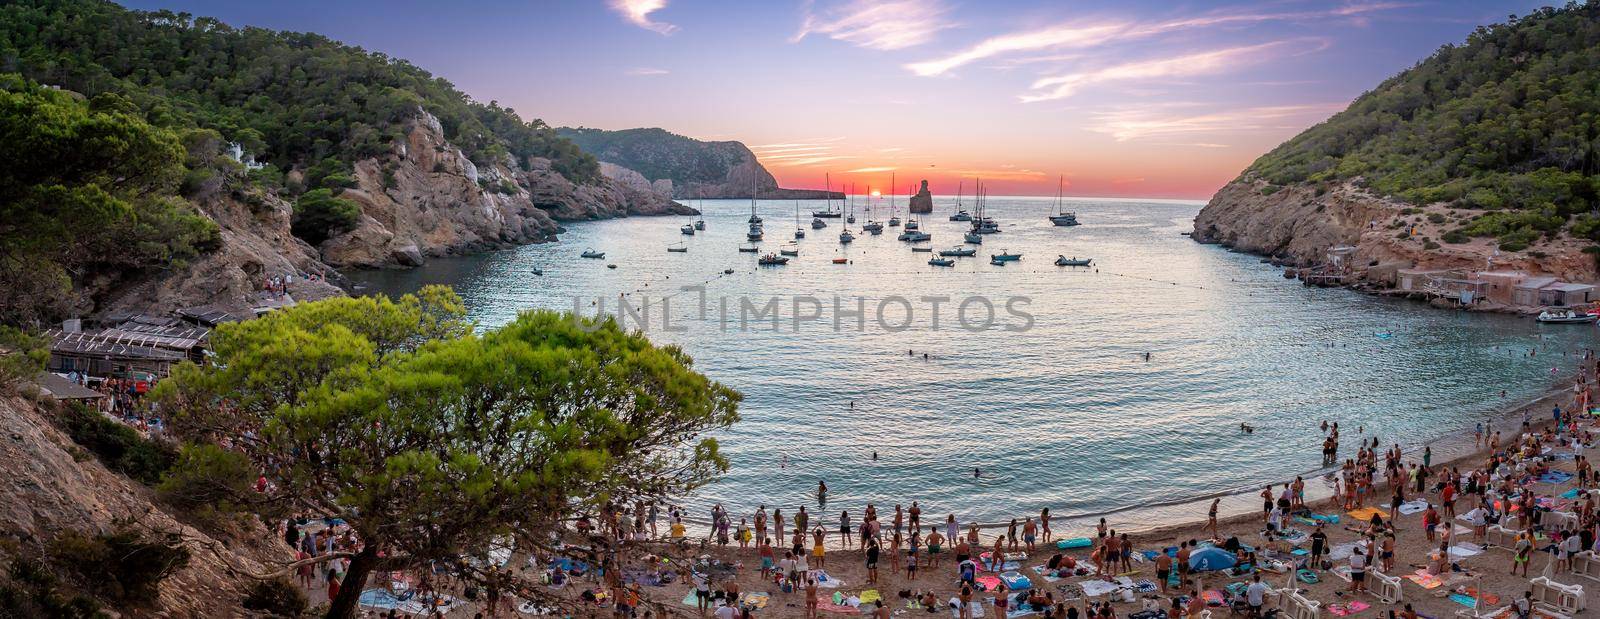 Panoramic view of a sunset in Cala Benirras